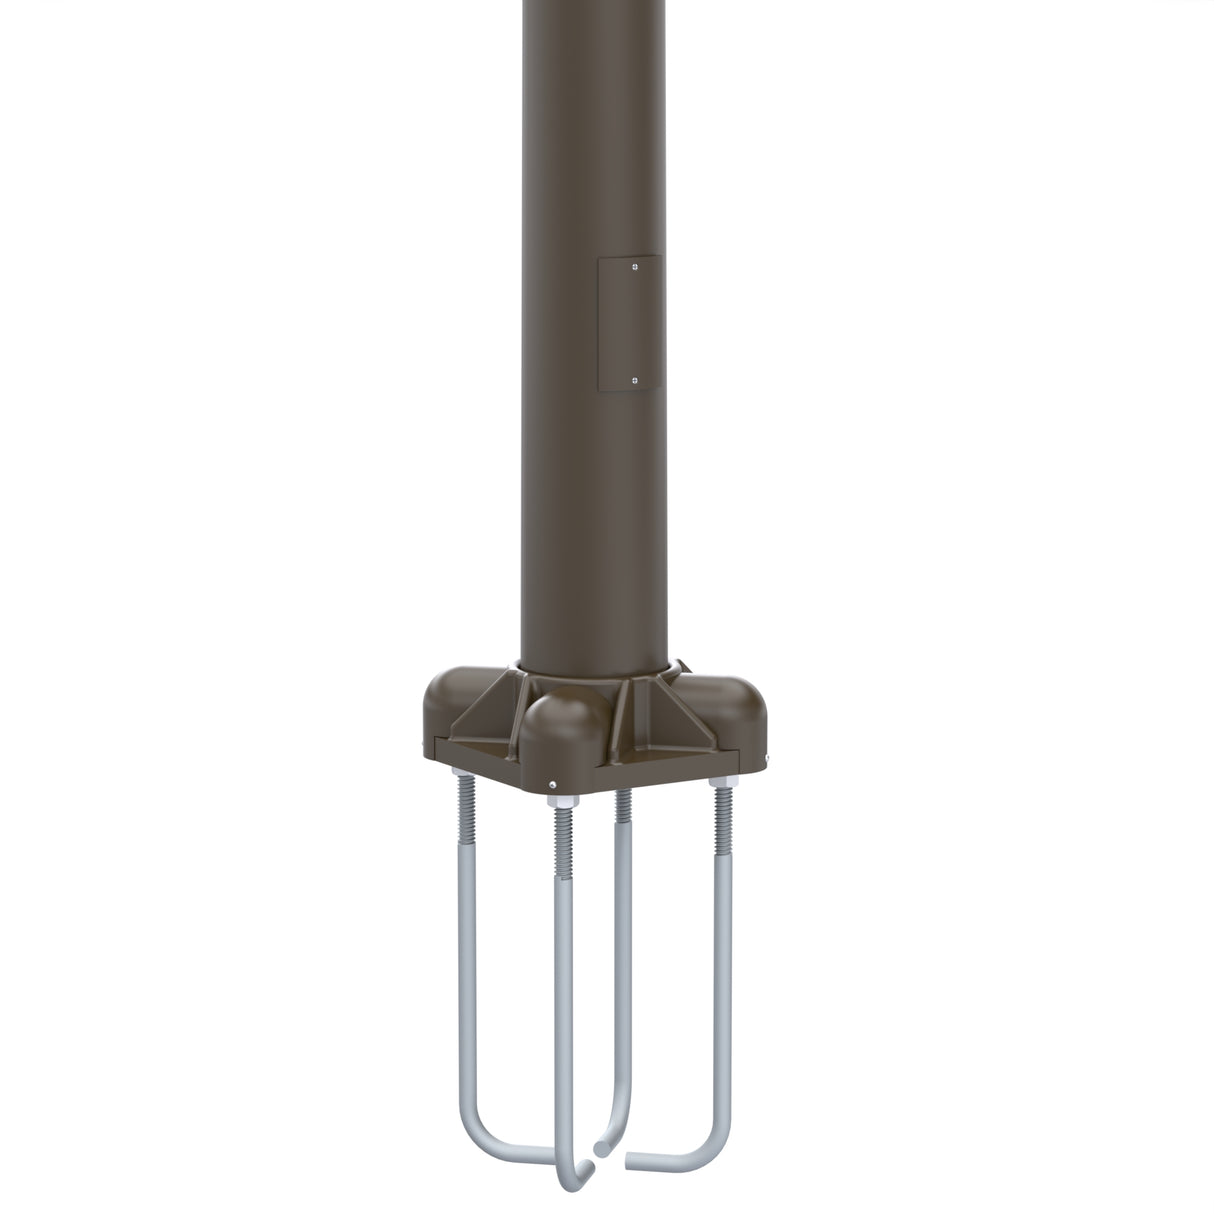 30' Tall x 6.0" Base OD x 4.0" Top OD x 0.156" Thick, Round Tapered Aluminum, Anchor Base Light Pole with 4' Davit Arm